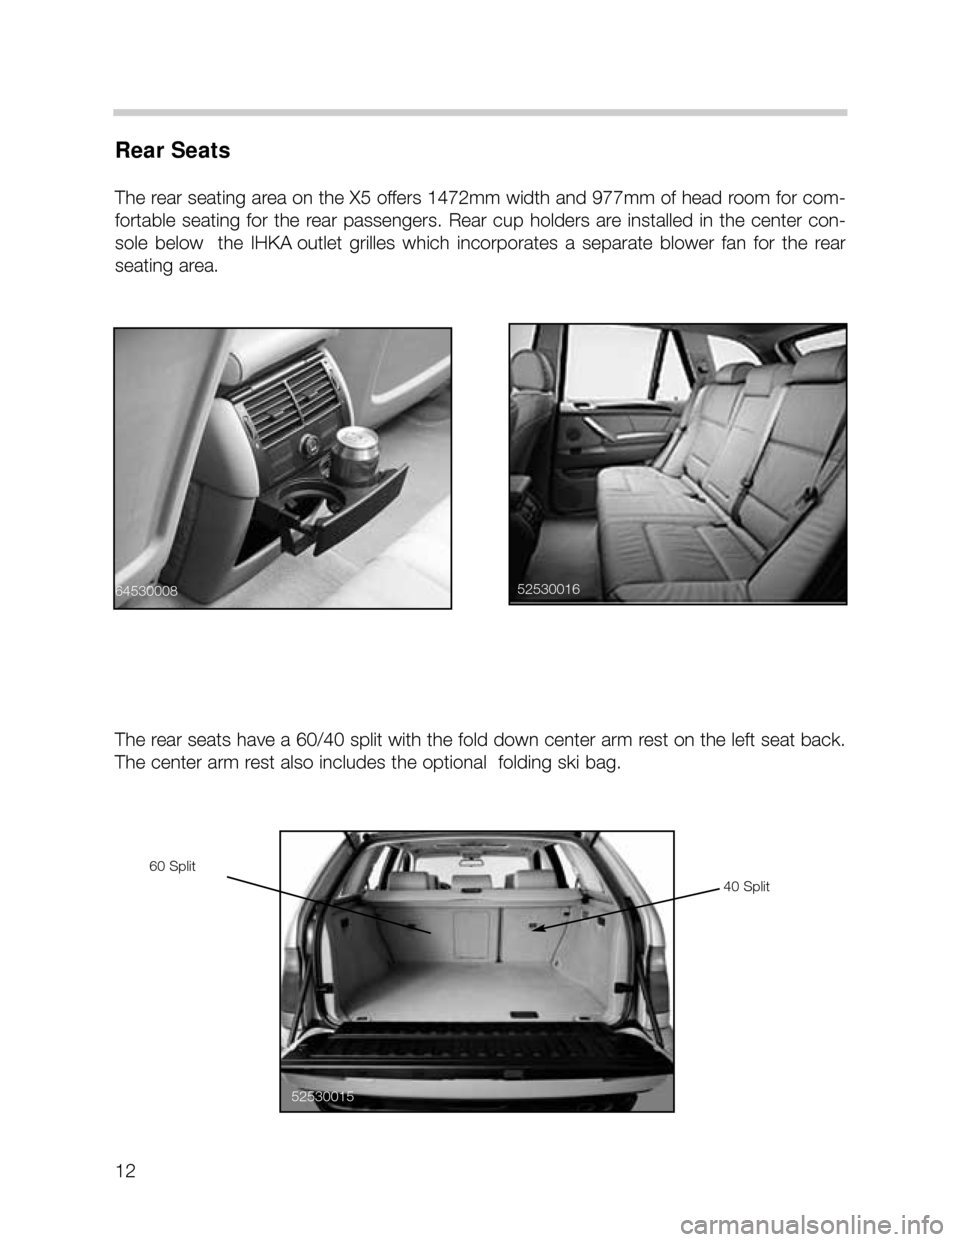 BMW X5 1999 E53 Workshop Manual 12
Rear Seats
The rear seating area on the X5 offers 1472mm width and 977mm of head room for com-
fortable  seating  for  the  rear  passengers.  Rear  cup  holders  are  installed  in  the  center  c